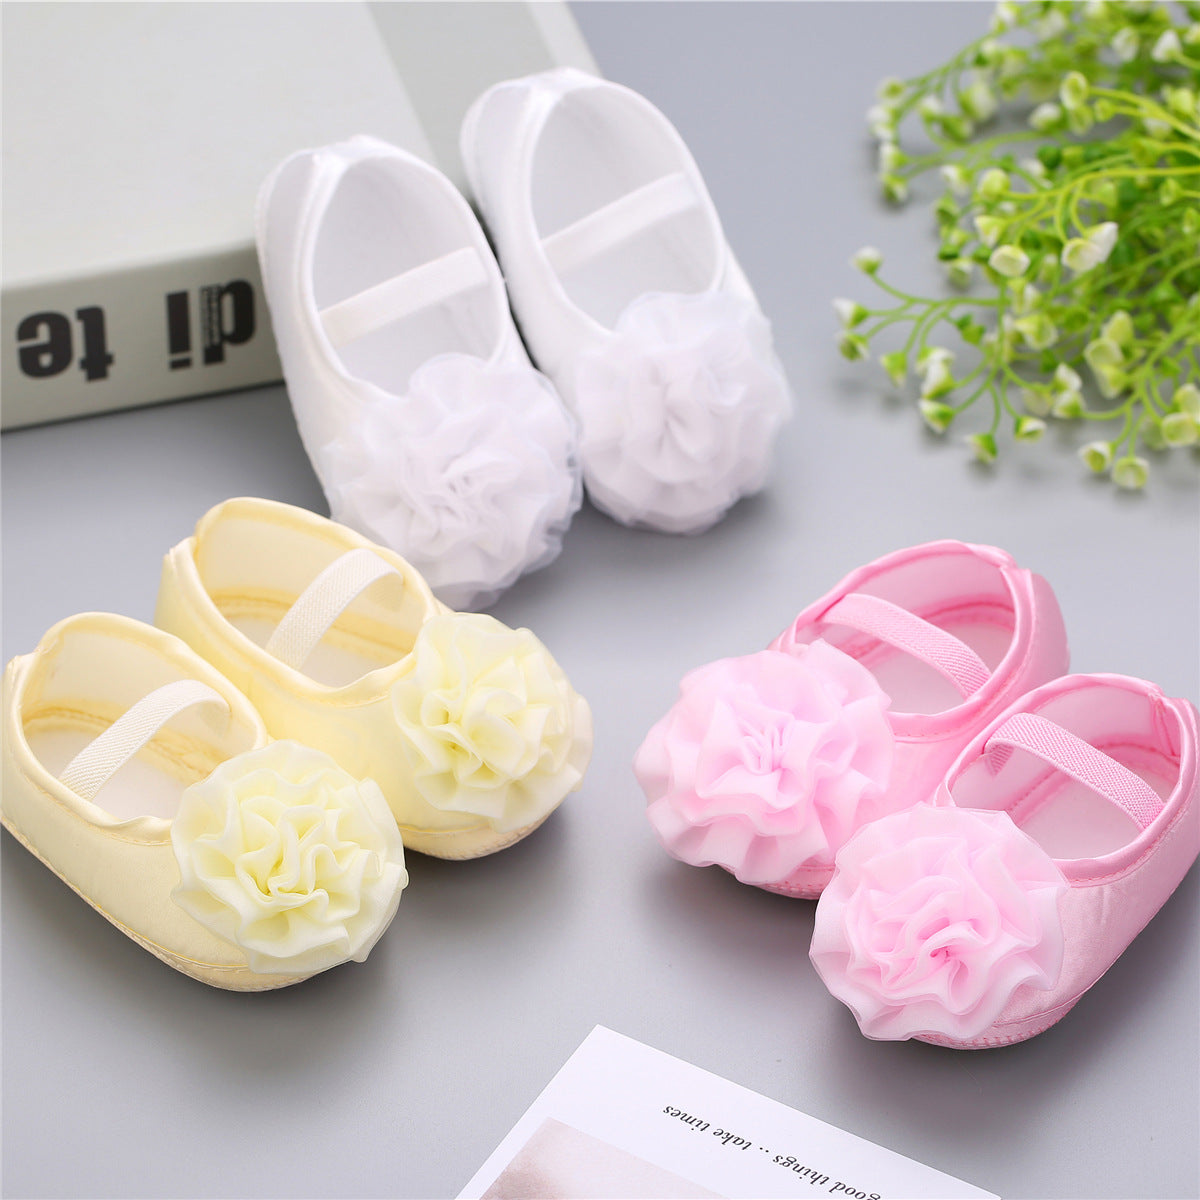 0-1 years old baby shoes 3-6-9-11 month 